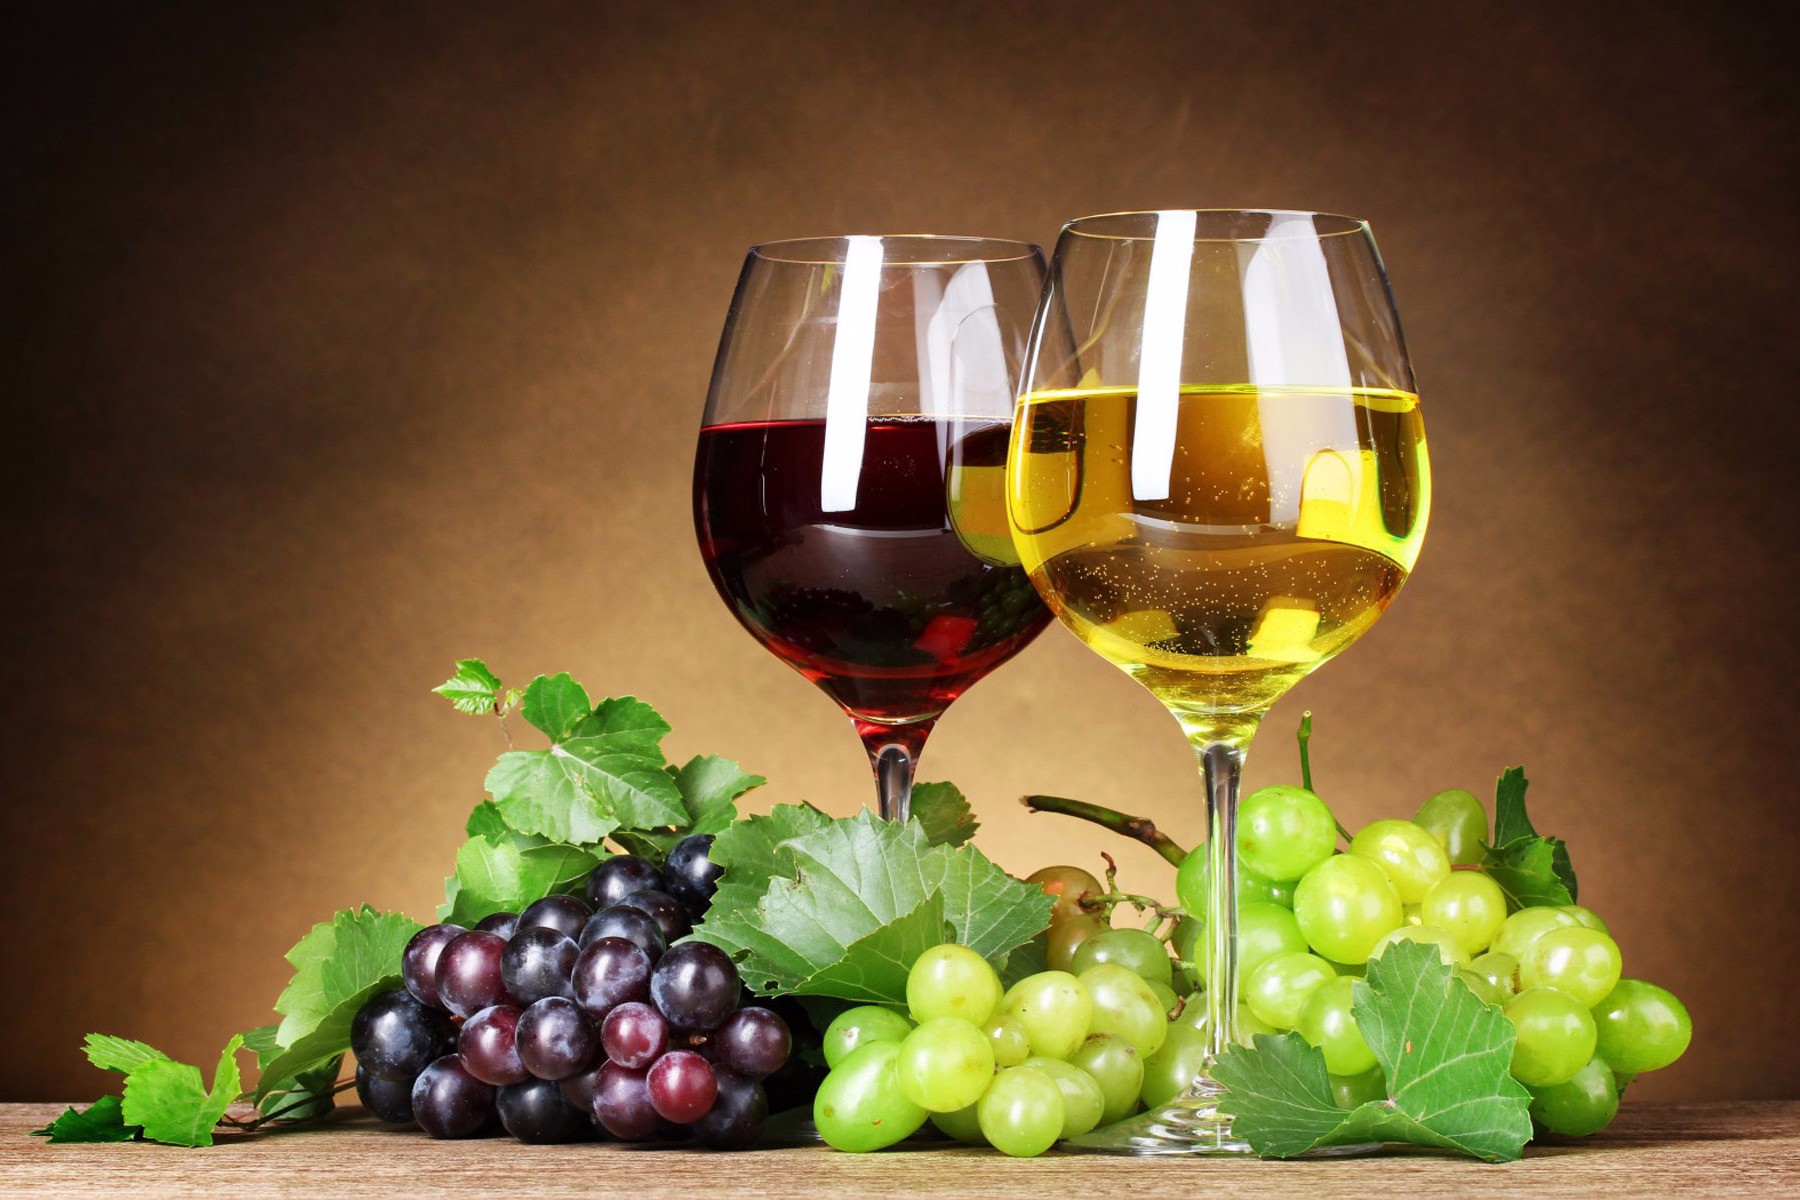 Germany, Canada and Hungary became interested in Armenian wine